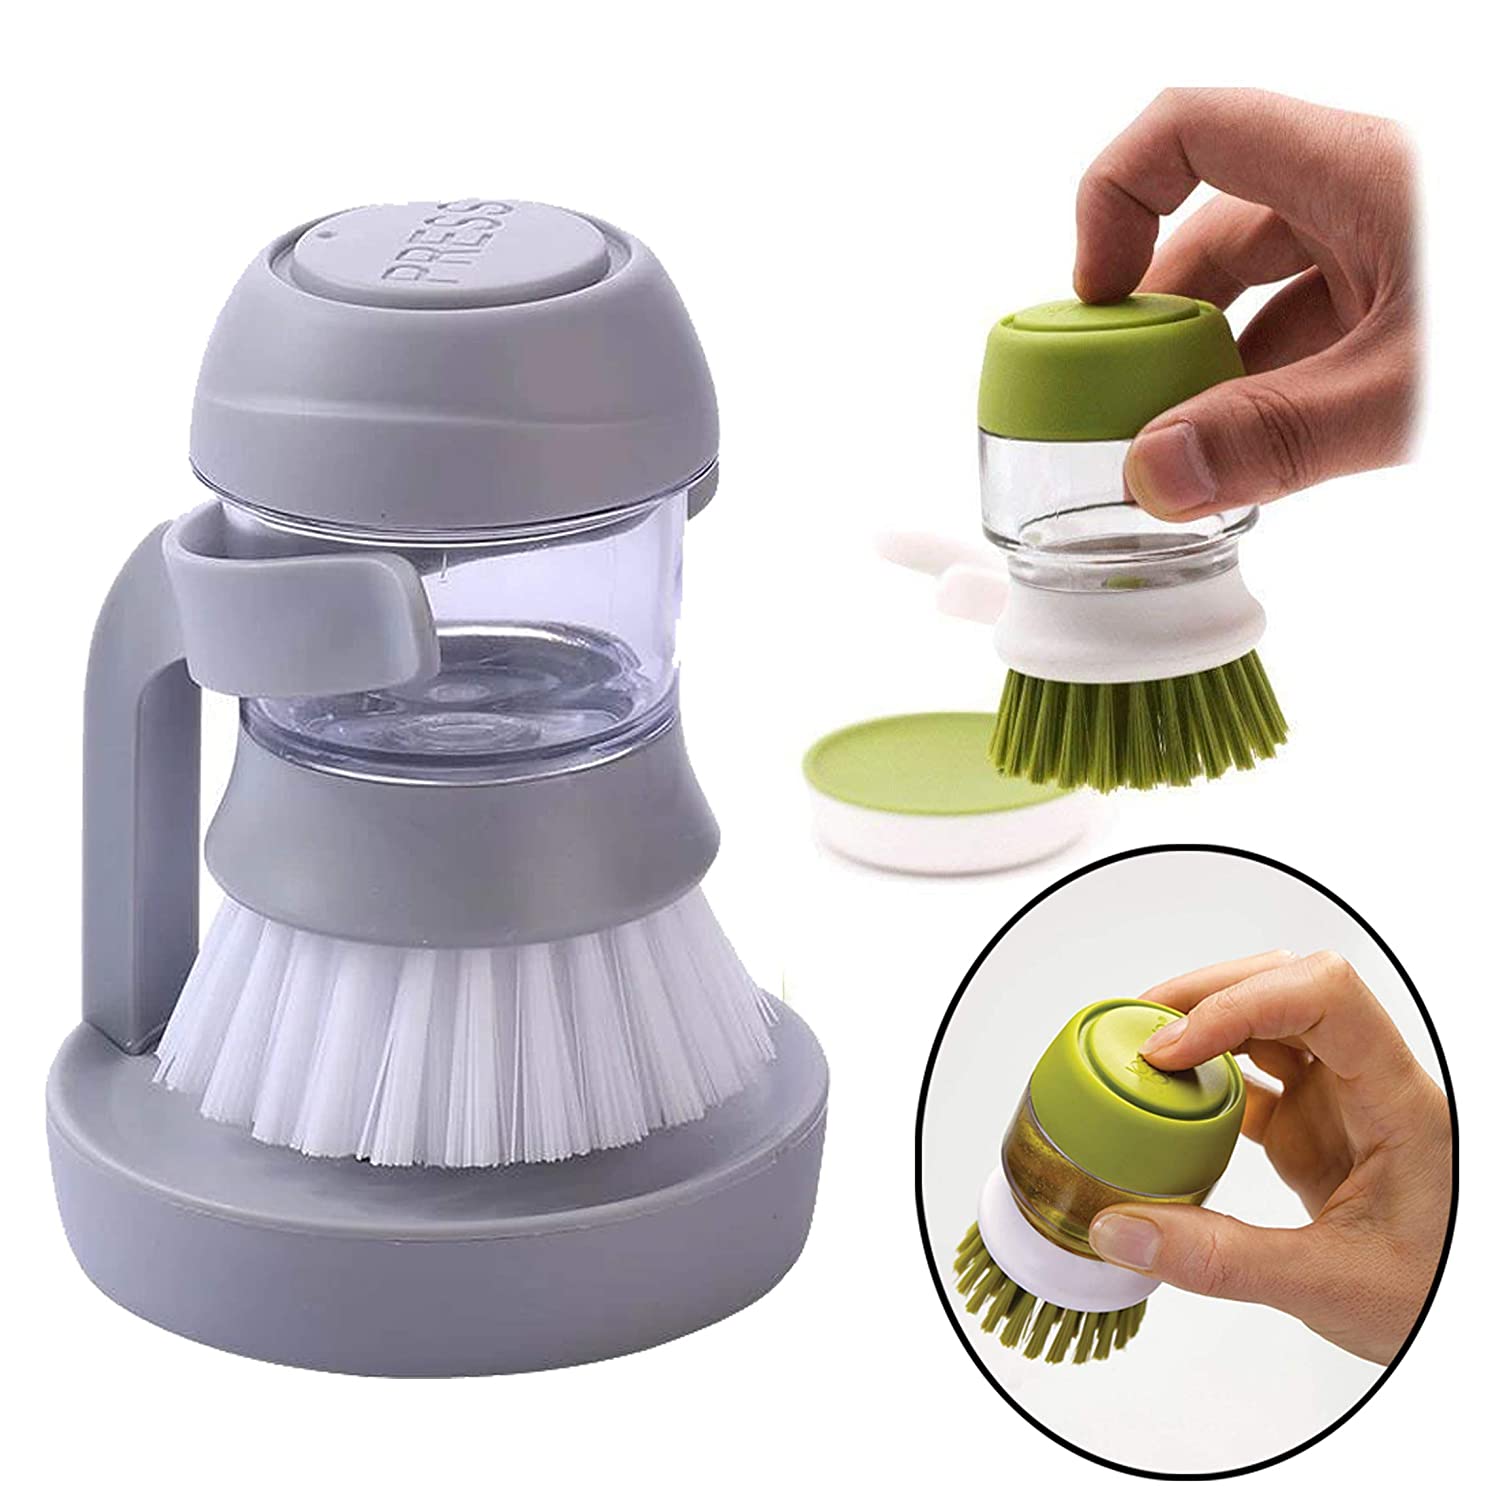 Cleaning Brush with Soap Dispenser for Kitchen, Sink, Dish Washer with Storage Stand